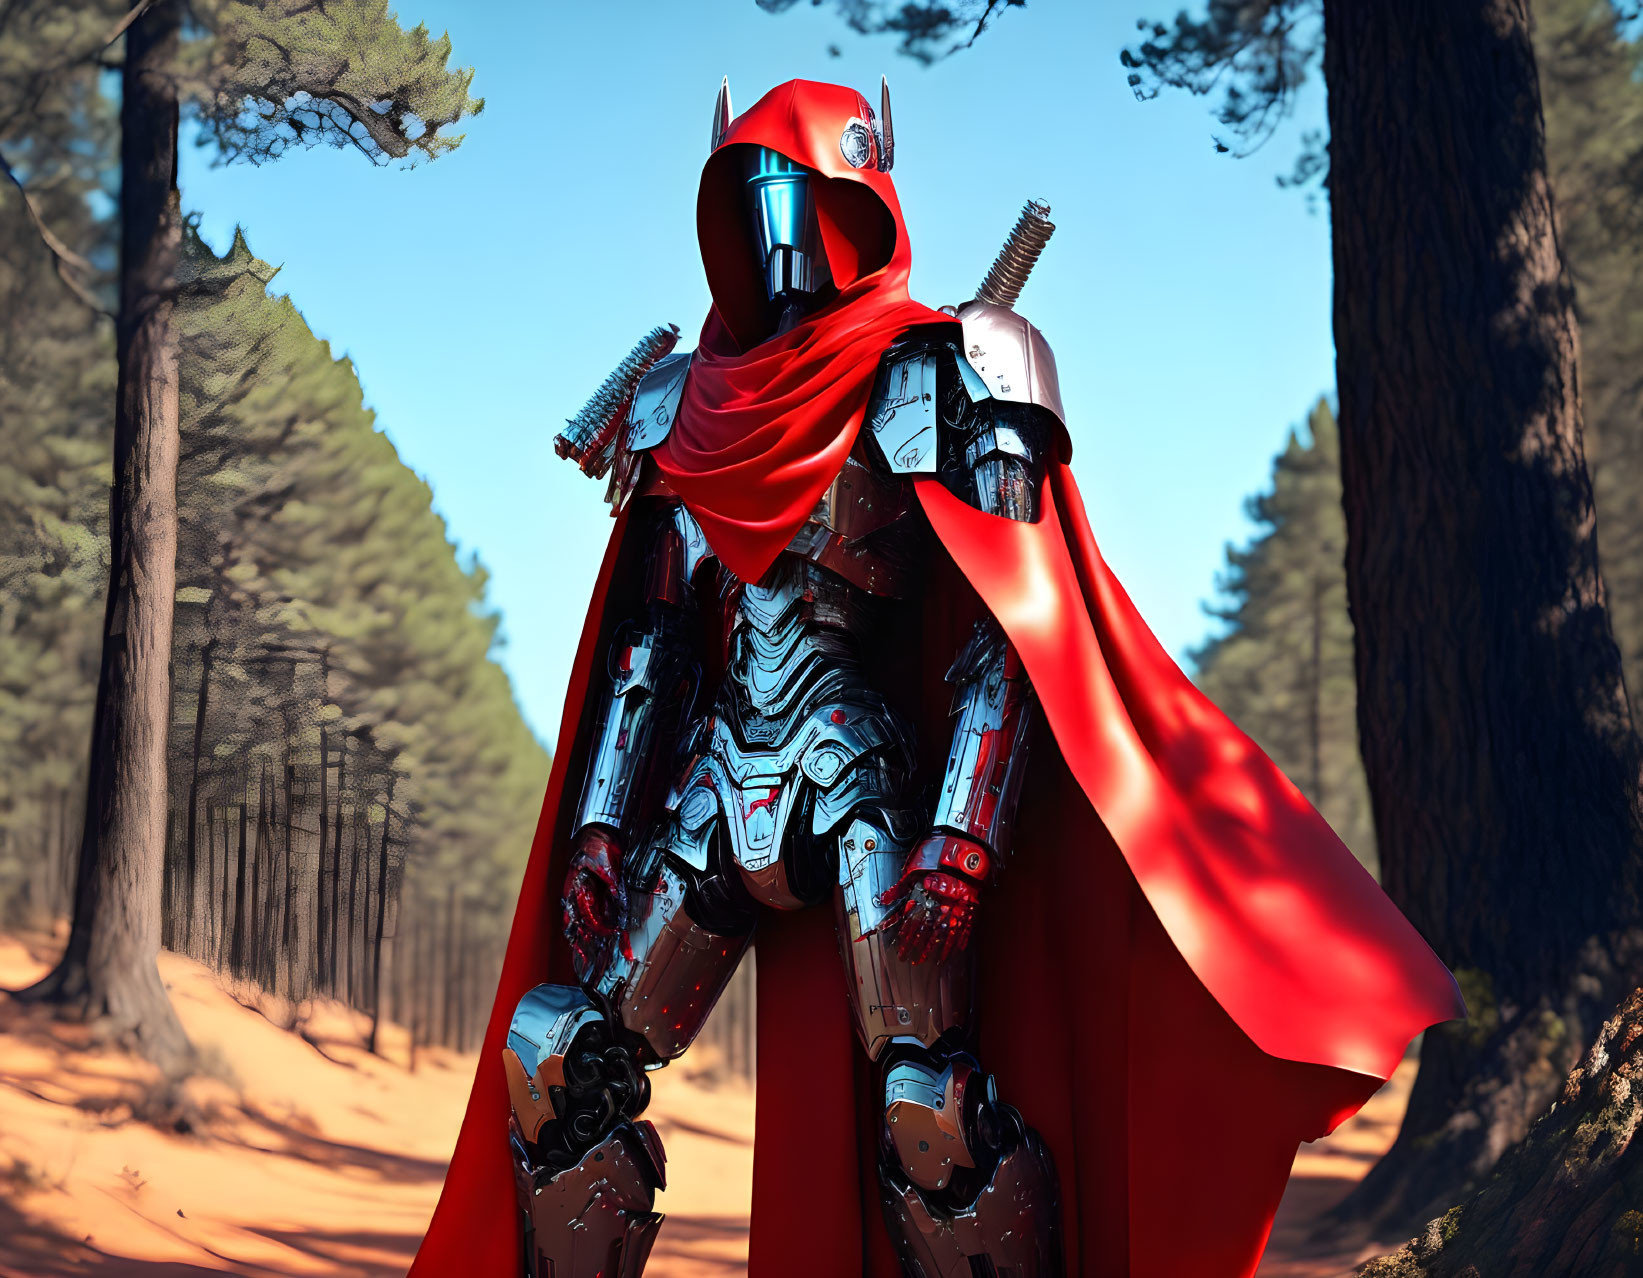 Futuristic red and silver armored knight in pine forest landscape.